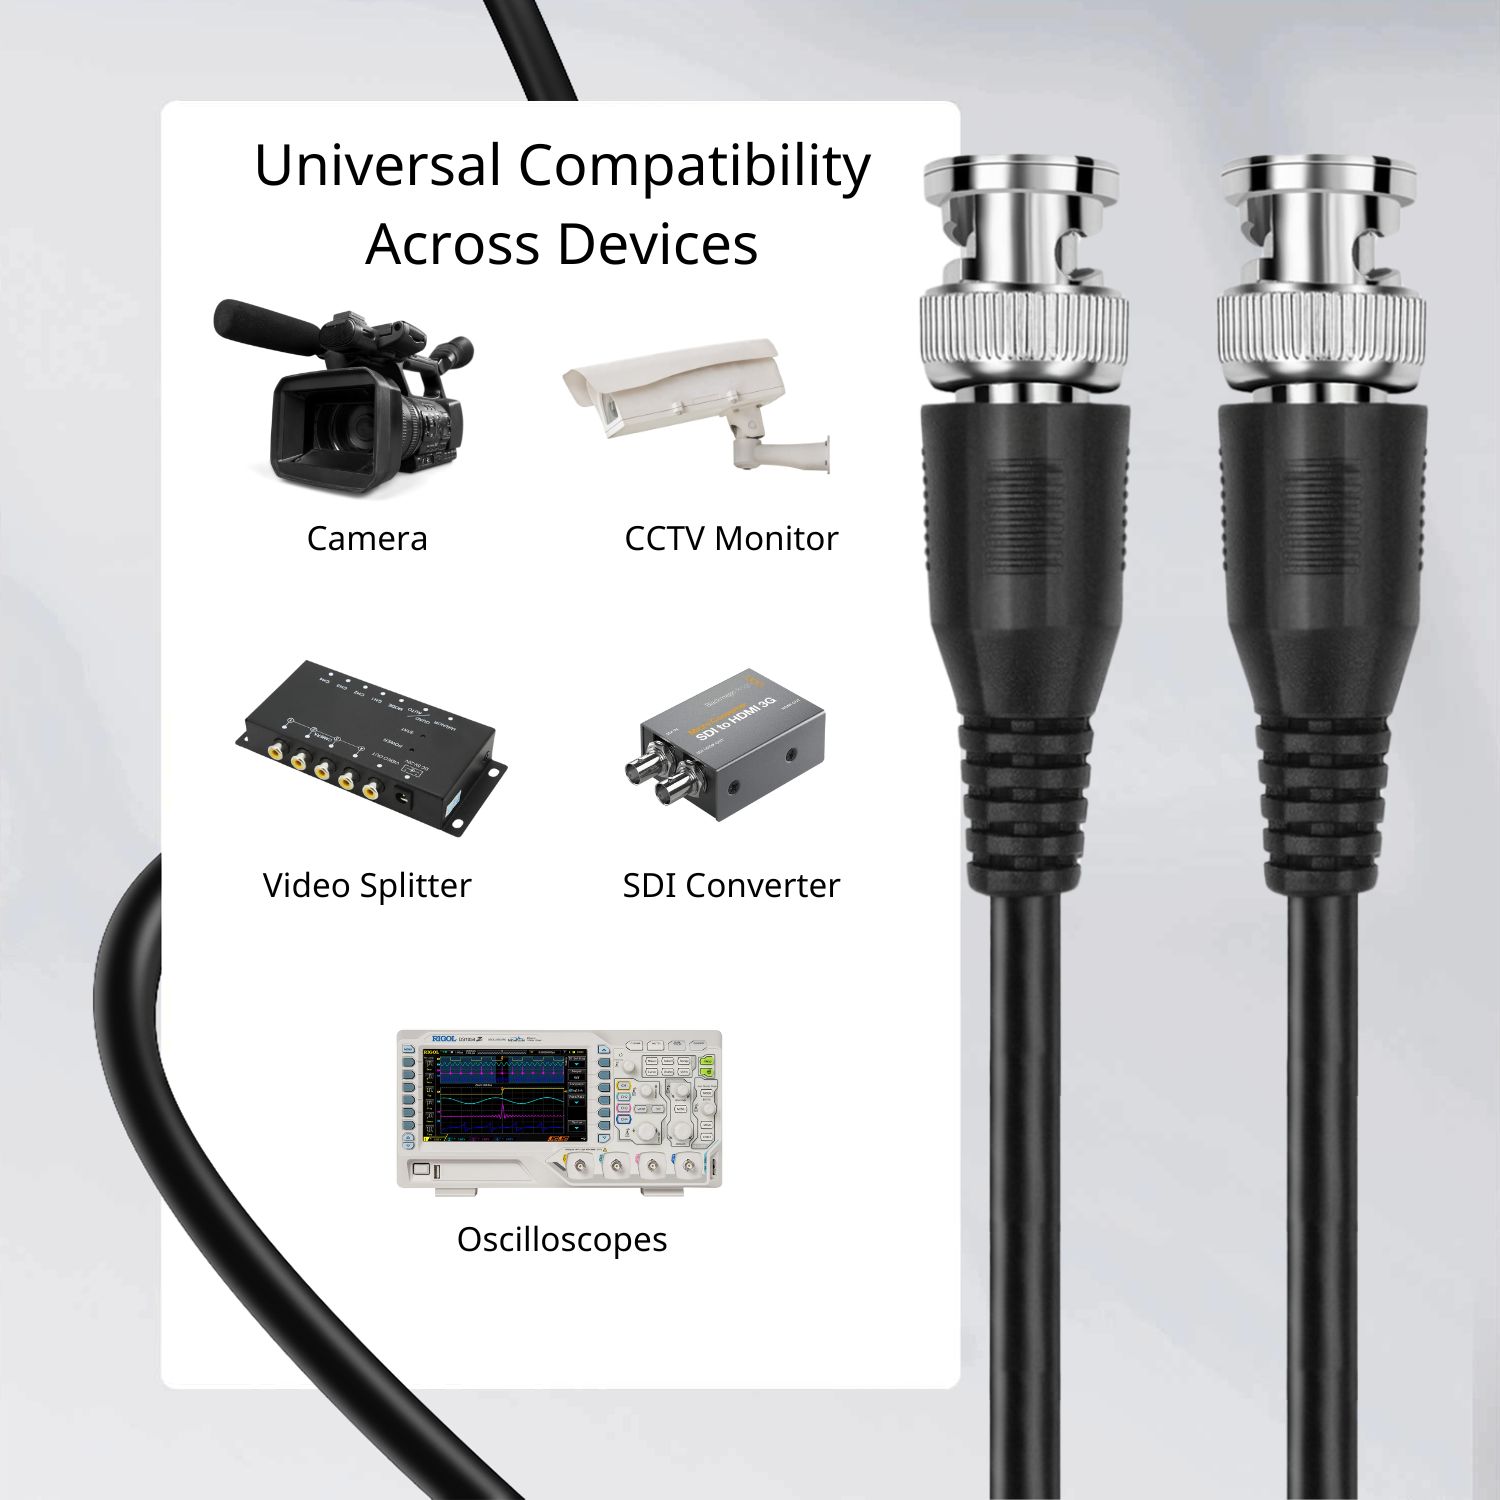 Versatile Applications: The TV Cable Cord 15ft supports high-bandwidth signals, perfect for setting up video broadcasting, CCTV, radio equipment, & audio systems